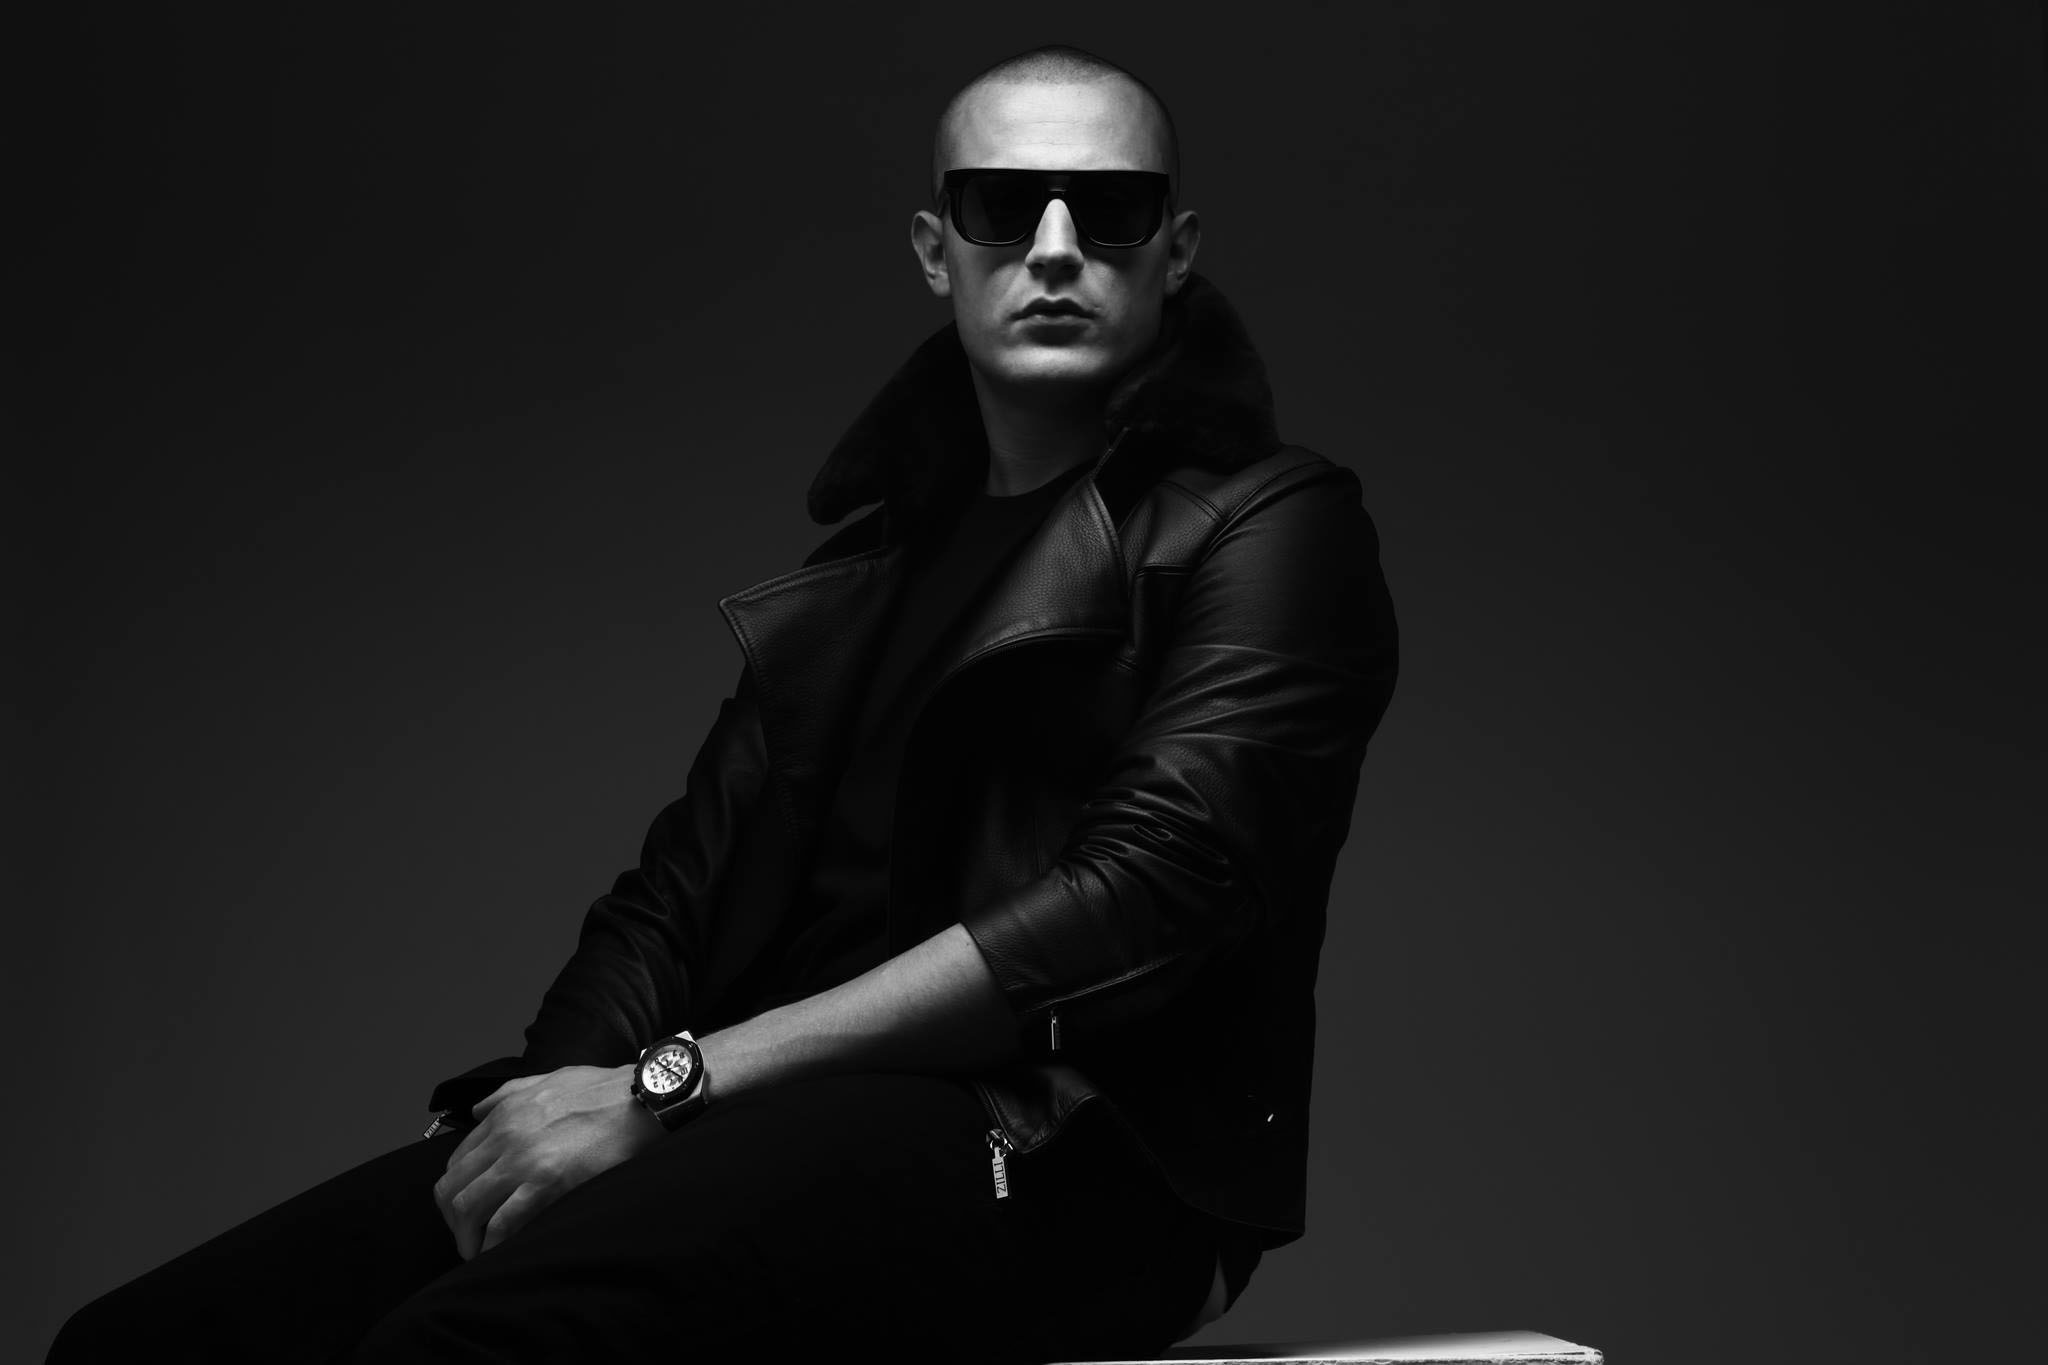 16 Surprising Facts About DJ Snake - Facts.net